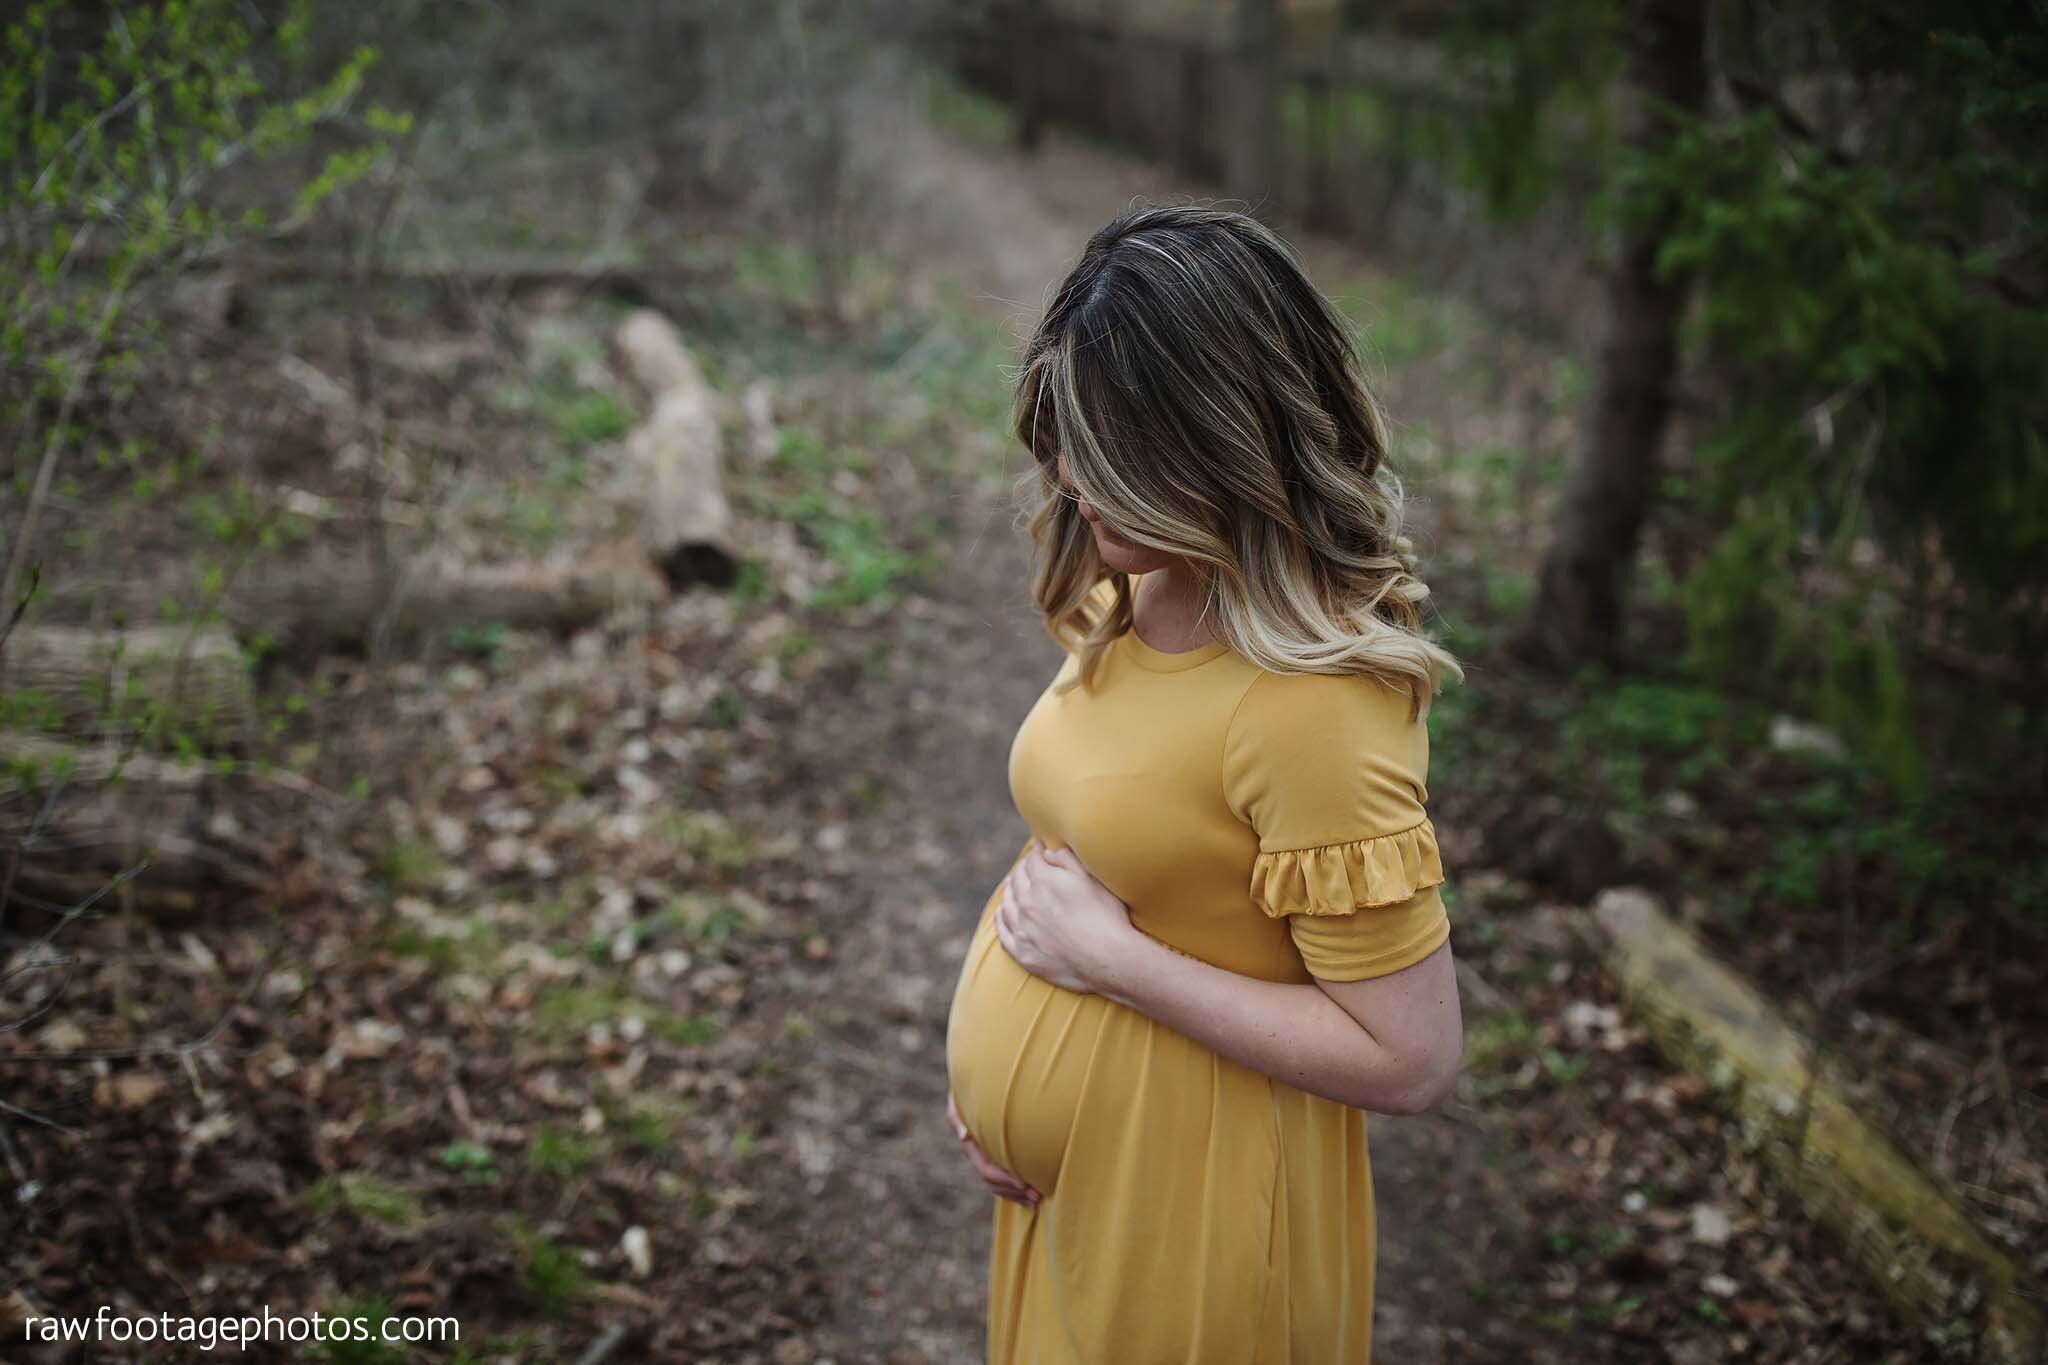 london_ontario_maternity_photographer-raw_footage_photography-in_home_lifestyle_maternity-forest_maternity_session-yellow_maternity_dress_035.jpg